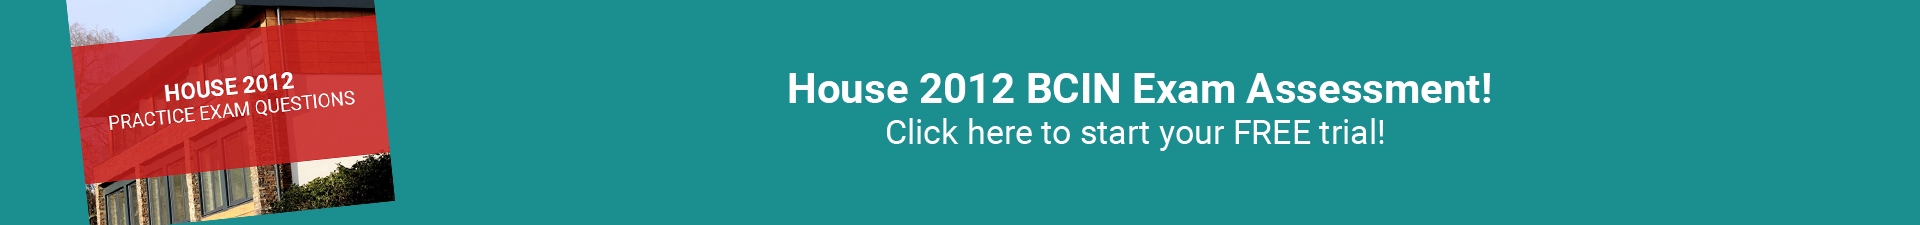 House 2012 Free Assessment